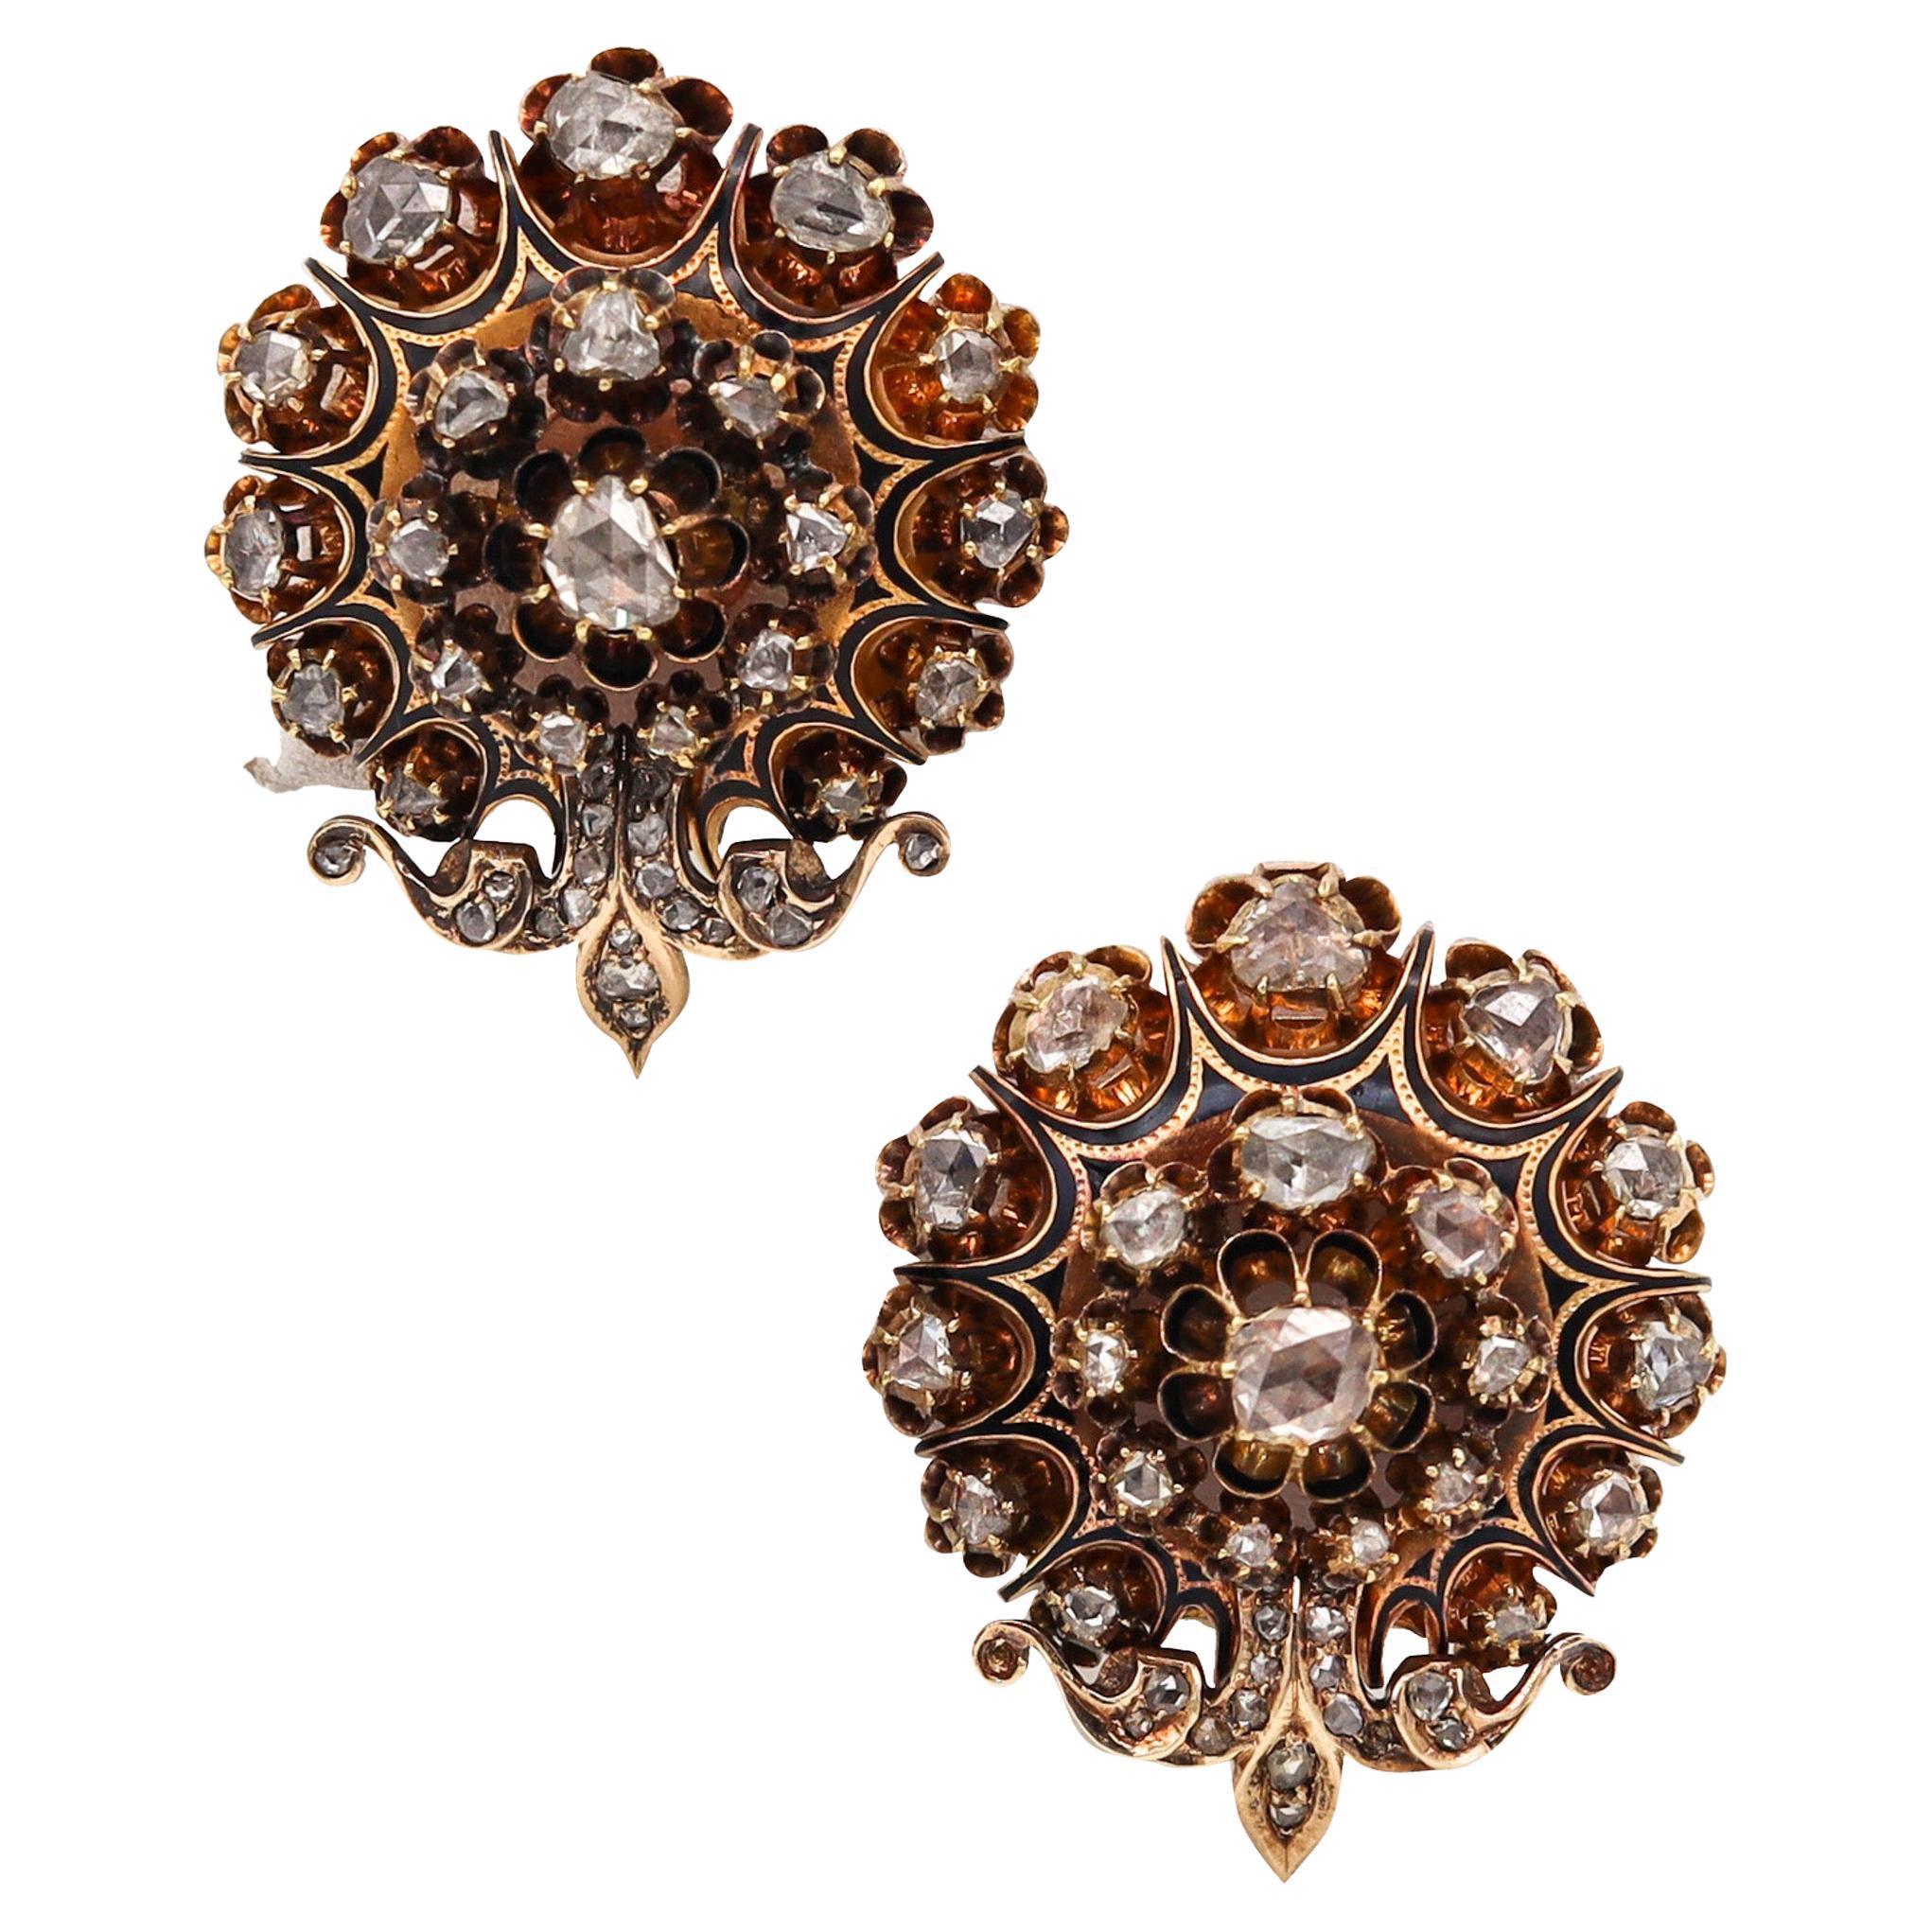 Georgian 1785 Antique Earrings in 15kt Gold and Enamel with 5.64 Ctw in Diamonds